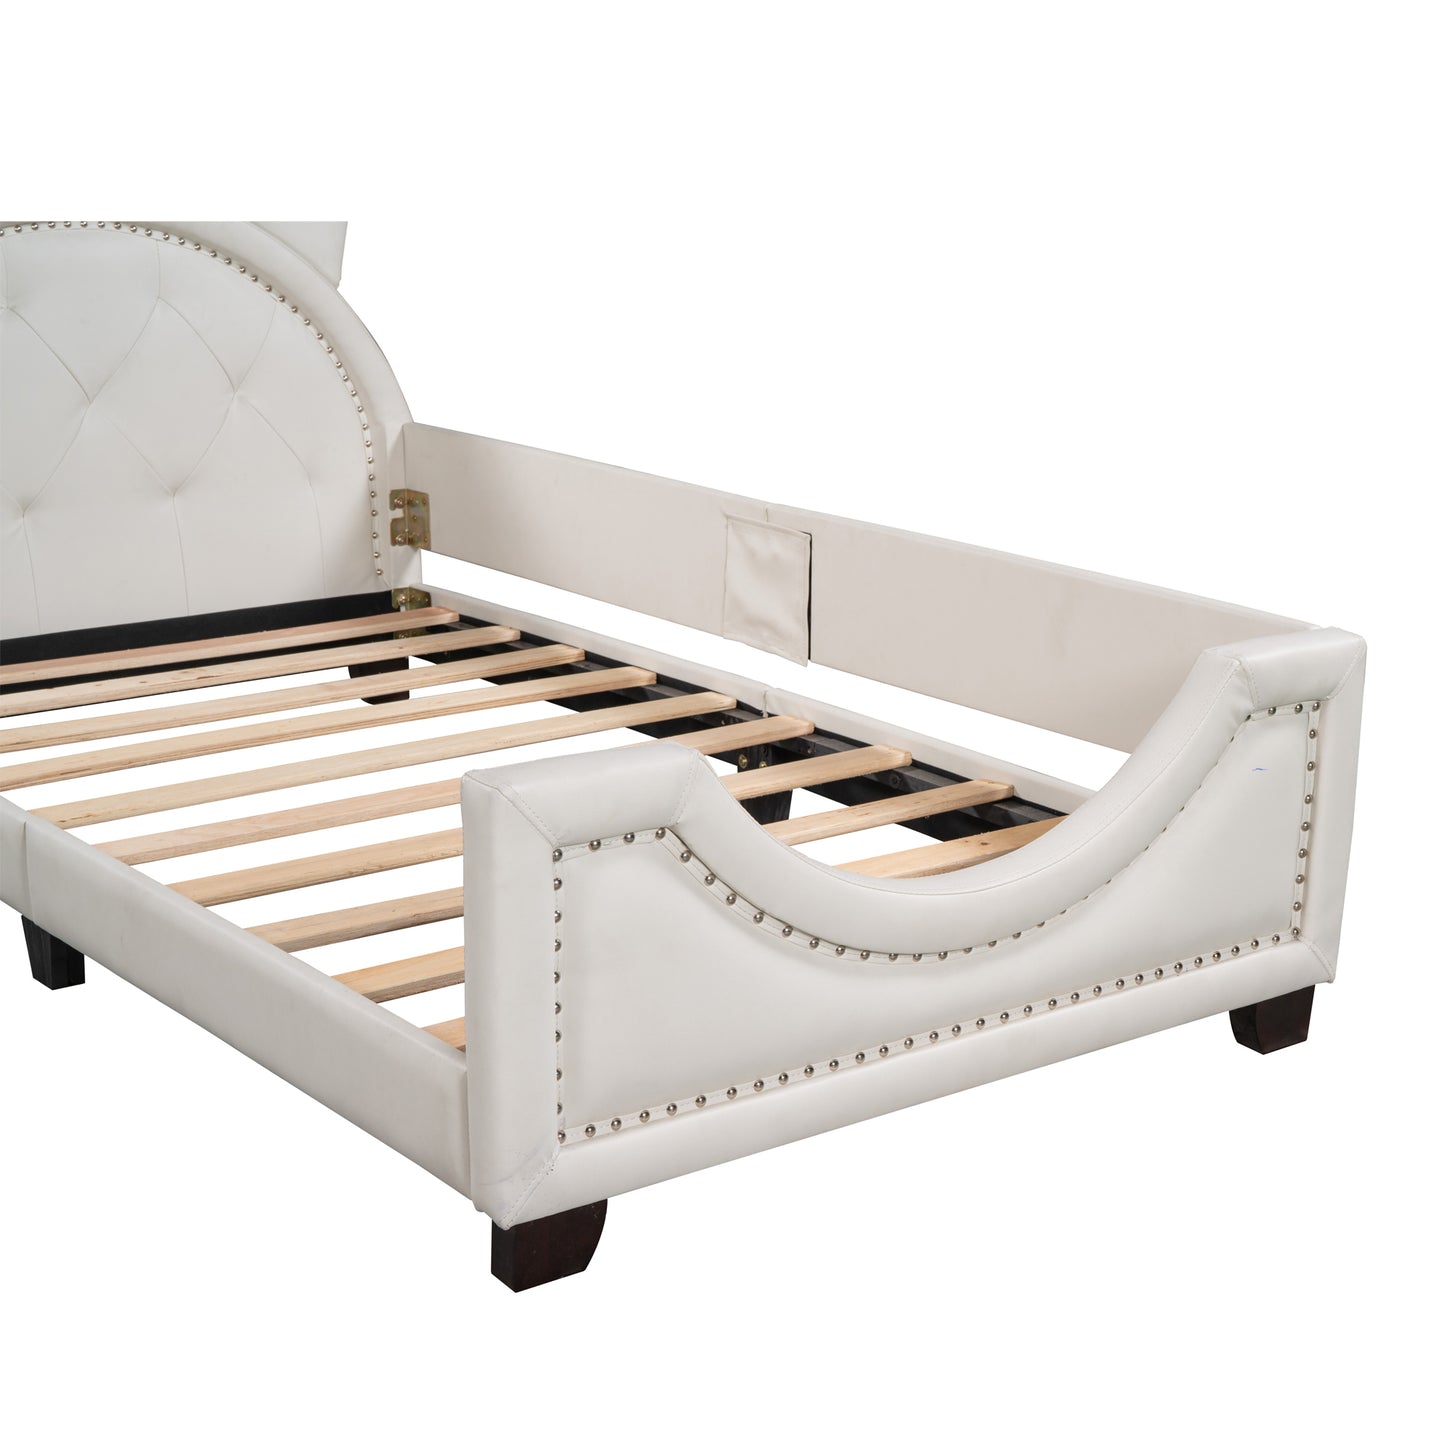 Twin Size Upholstered Daybed with Carton Ears Shaped Headboard, White